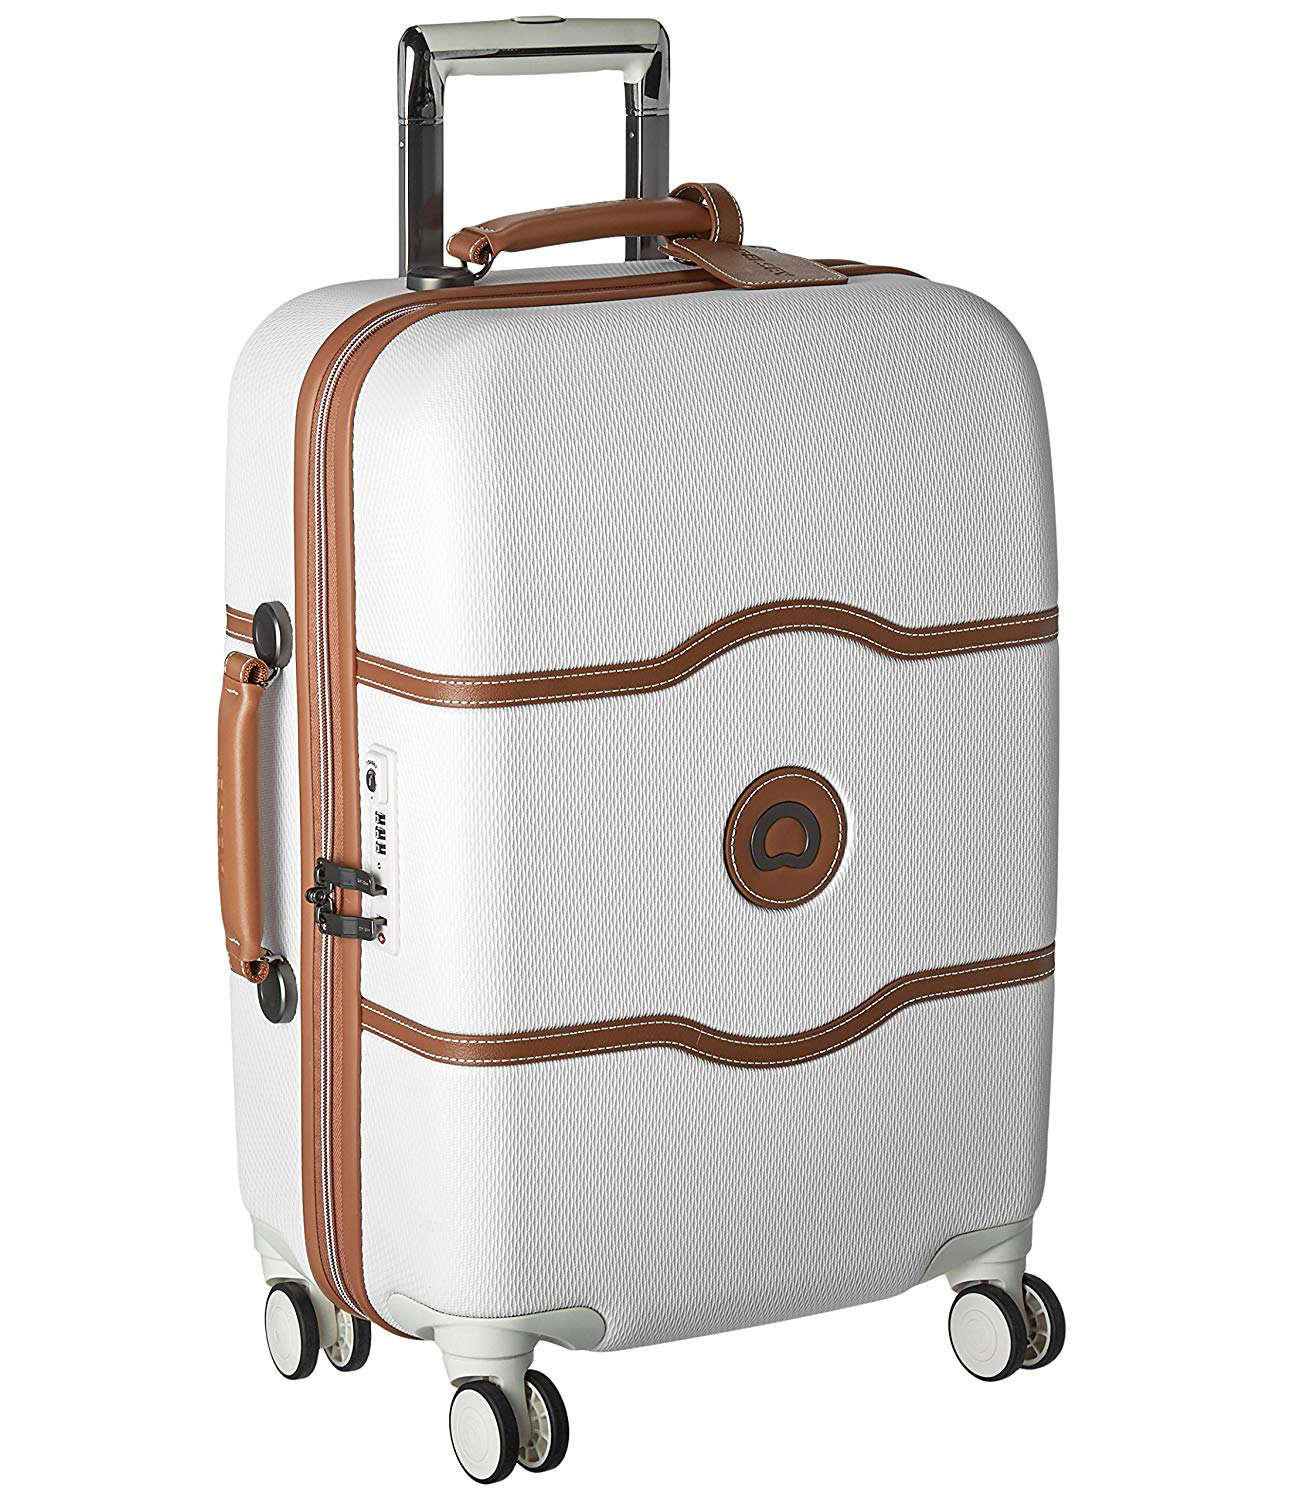 White and Tan Carry-On Suitcase